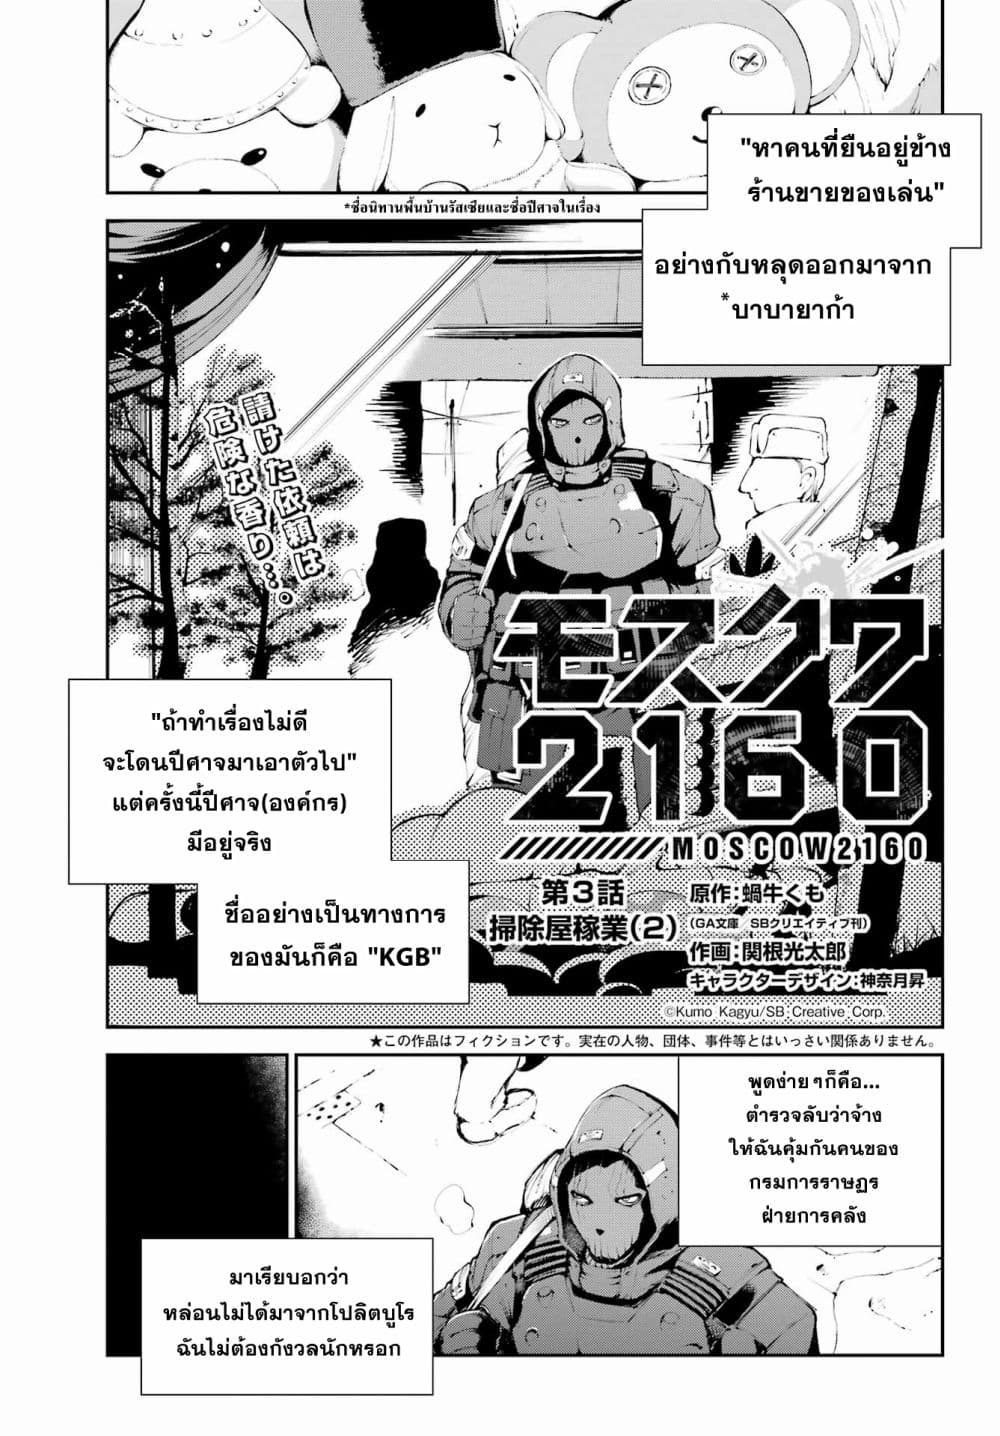 Moscow 2160 ตอนที่ 3 (1)